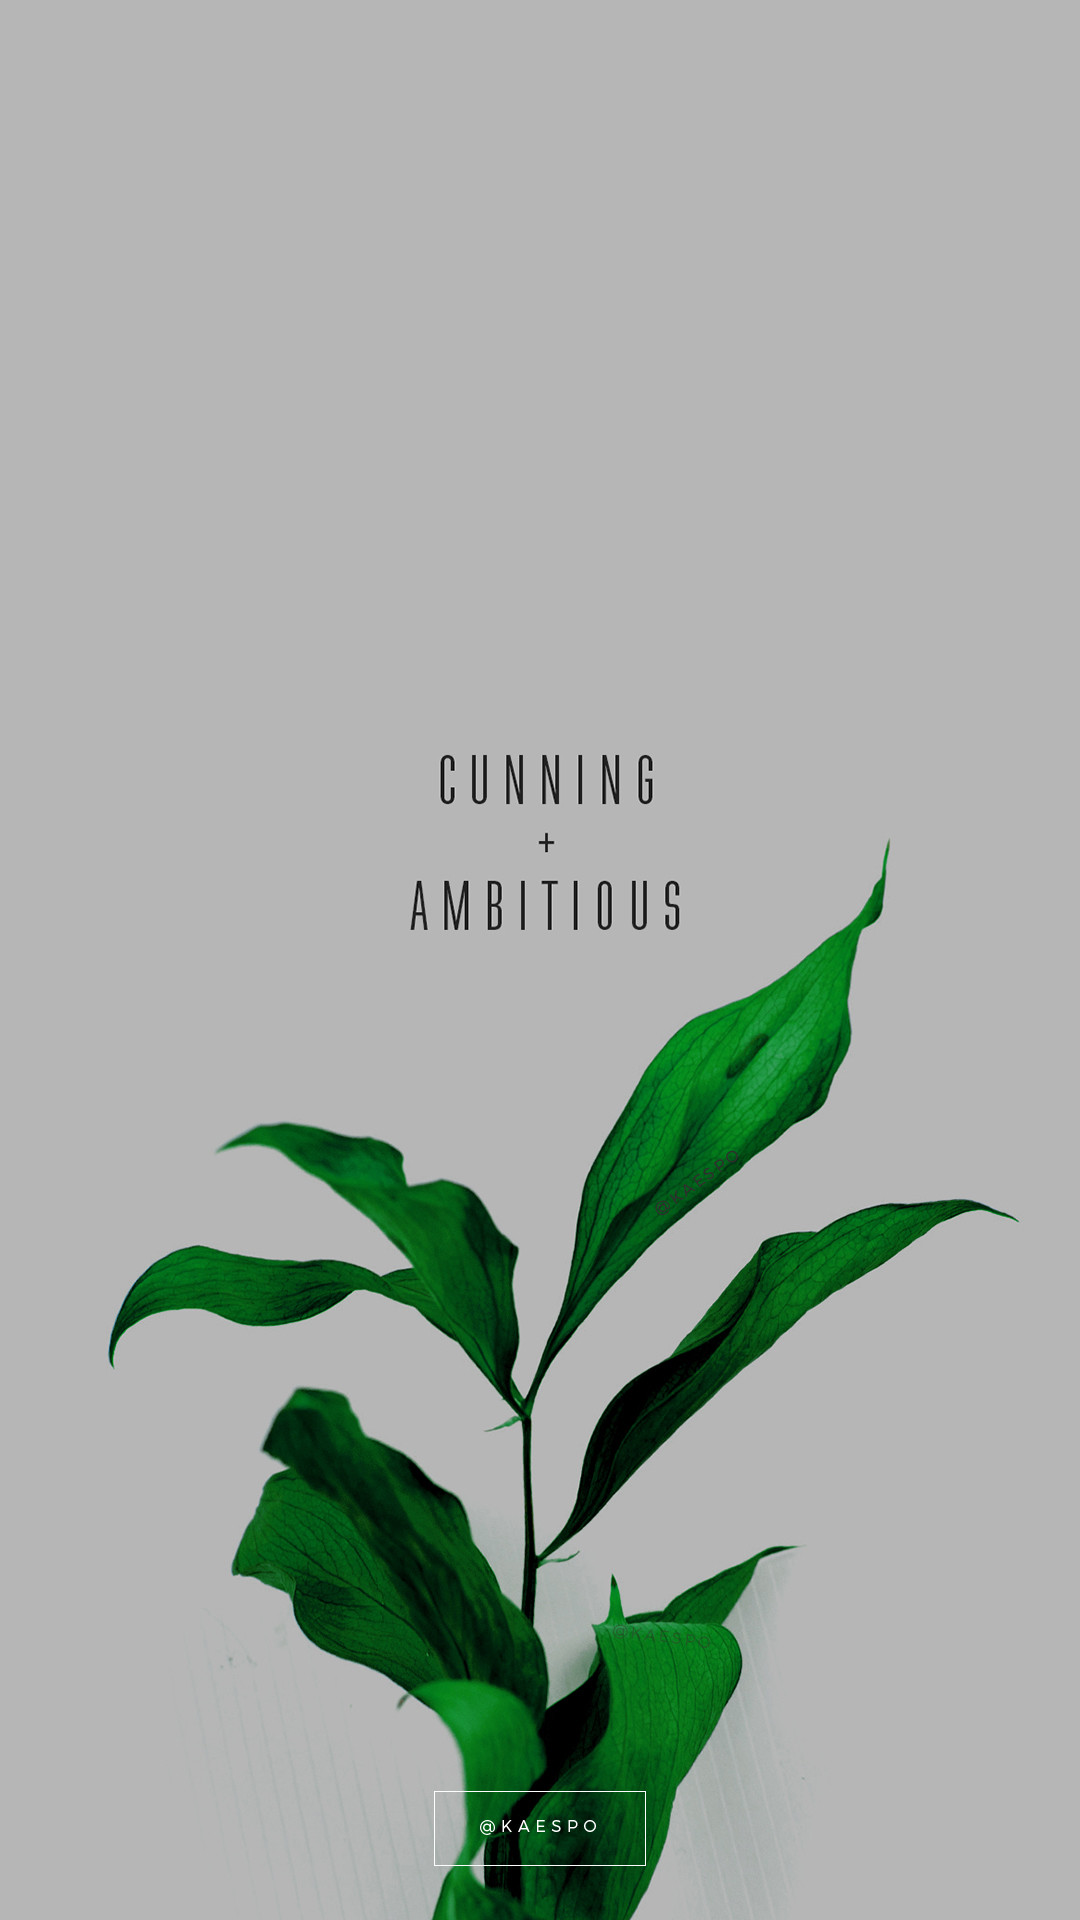 1080x1920 Cunning And Ambitious Slytherin Quote on Green Floral Background by kaespo